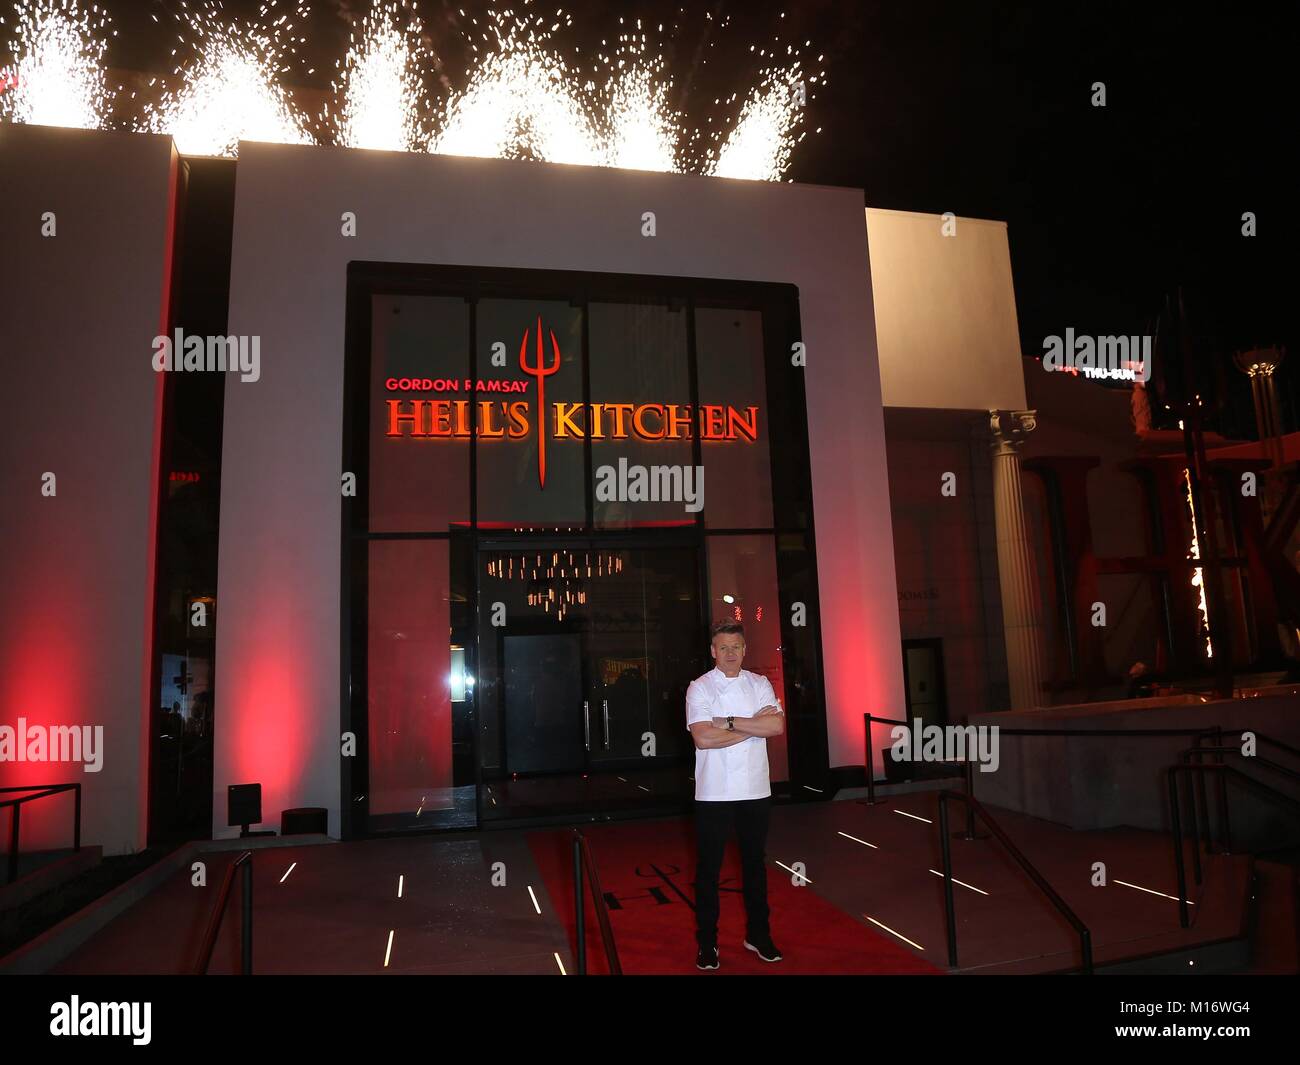 Gordon Ramsay Hells Kitchen Las Vegas High Resolution Stock Photography and  Images - Alamy